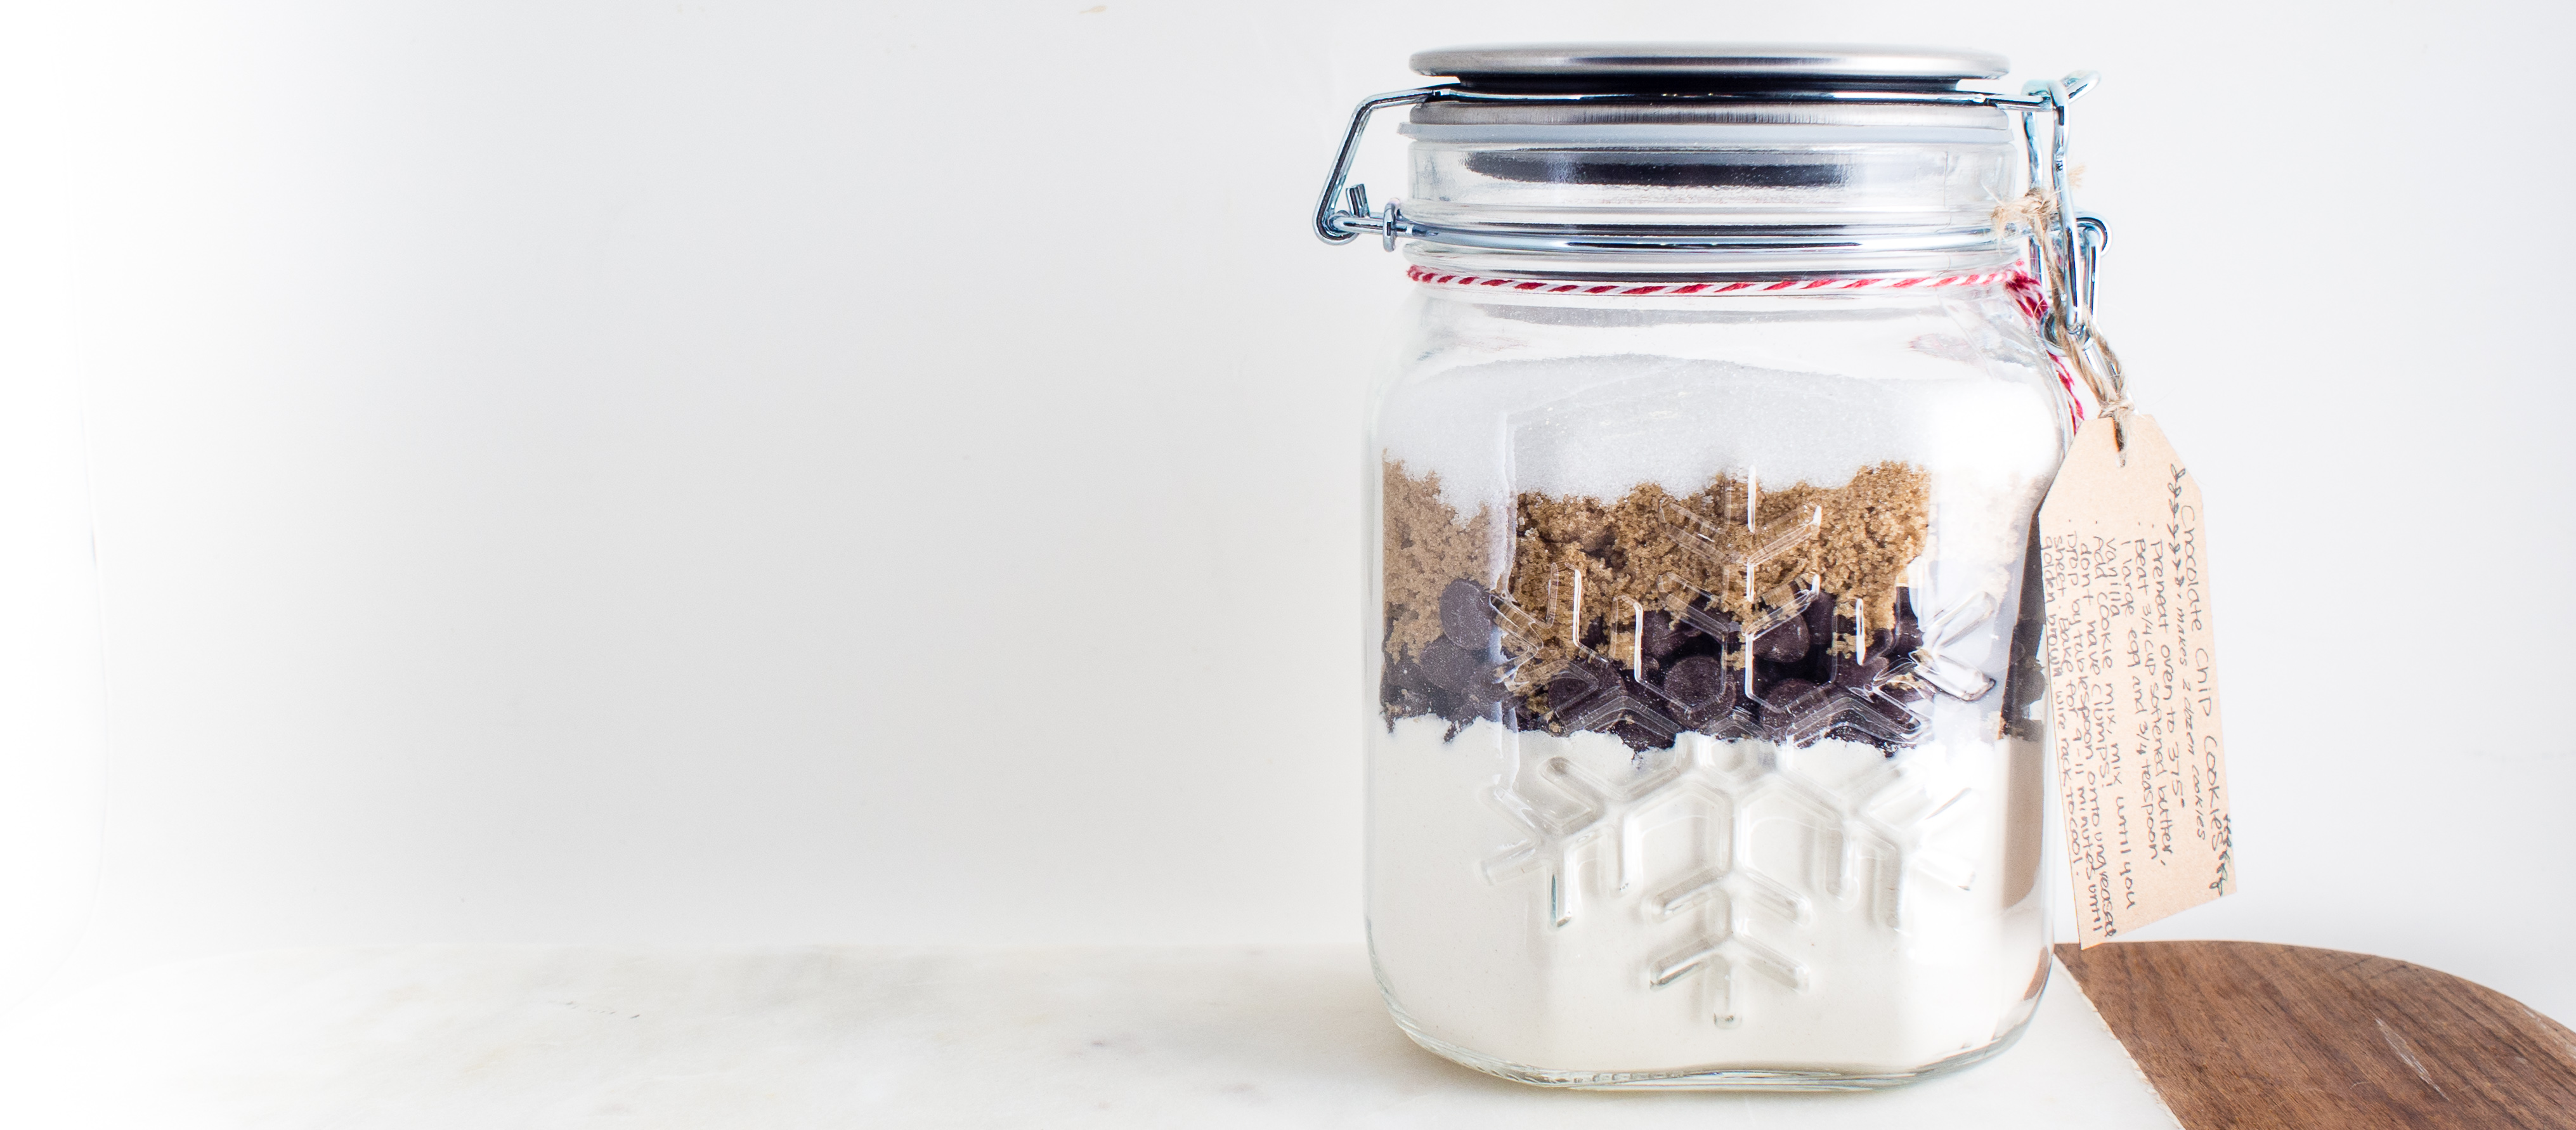 https://www.forevernomday.com/wp-content/uploads/2016/11/Chocolate-Chip-Cookie-in-a-Jar-1140x500.jpg